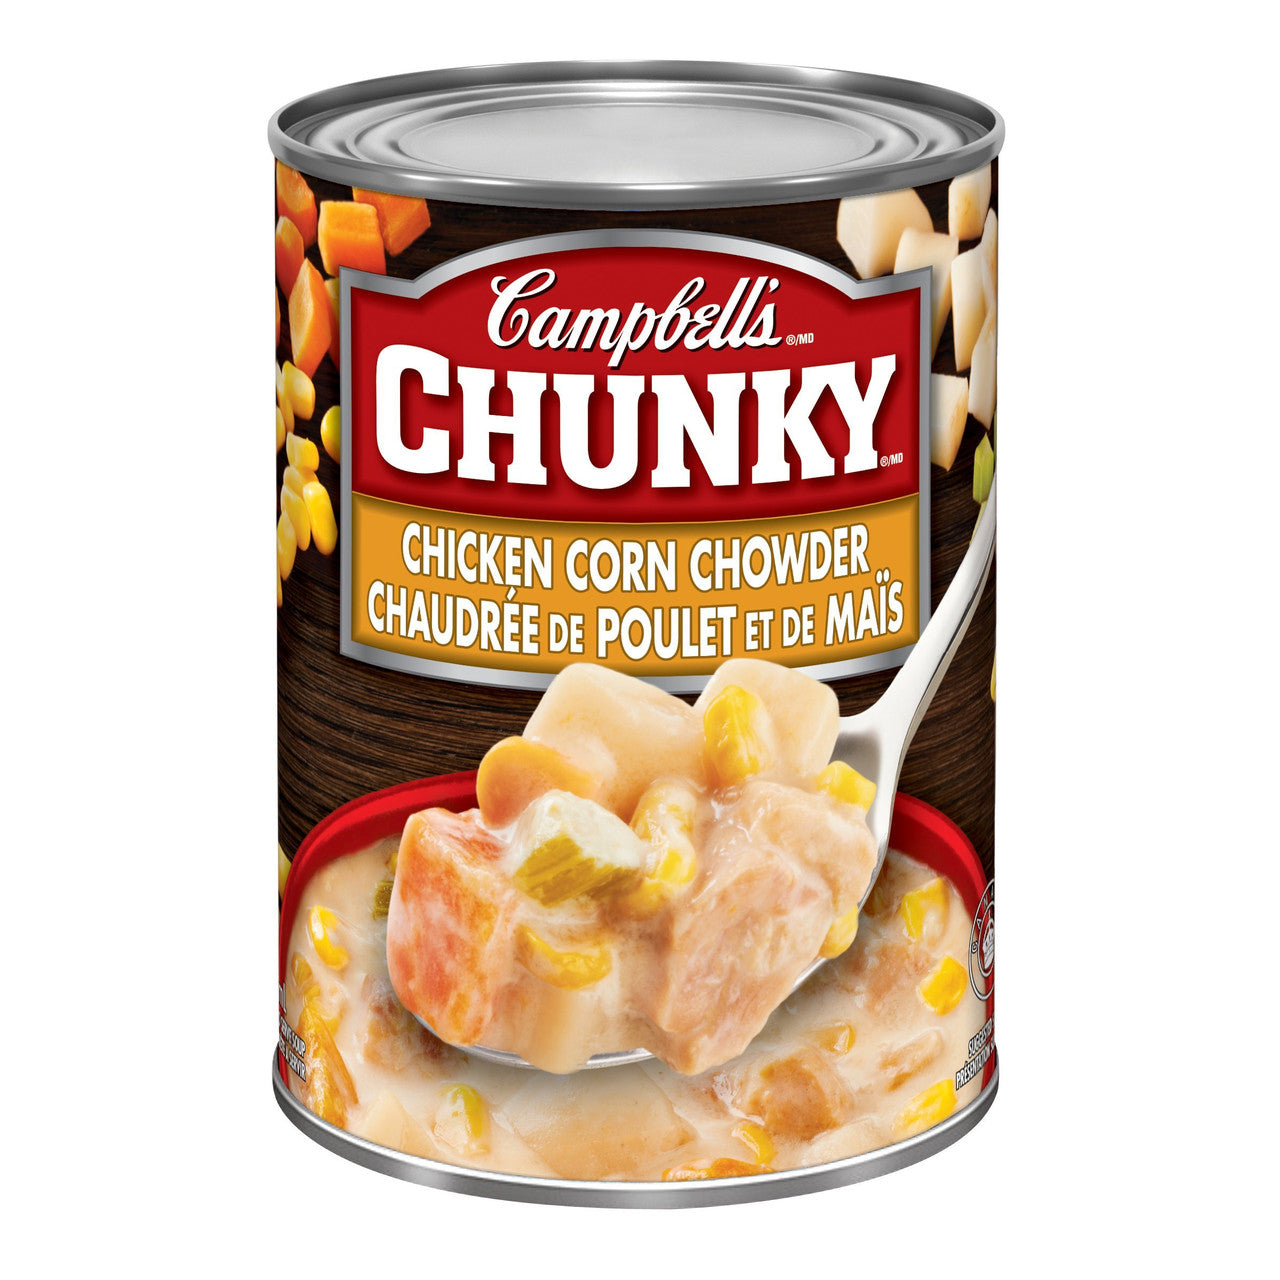 Campbell's Chunky Chicken Corn Chowder Soup, 540ml/18.3 oz. (Canadian)